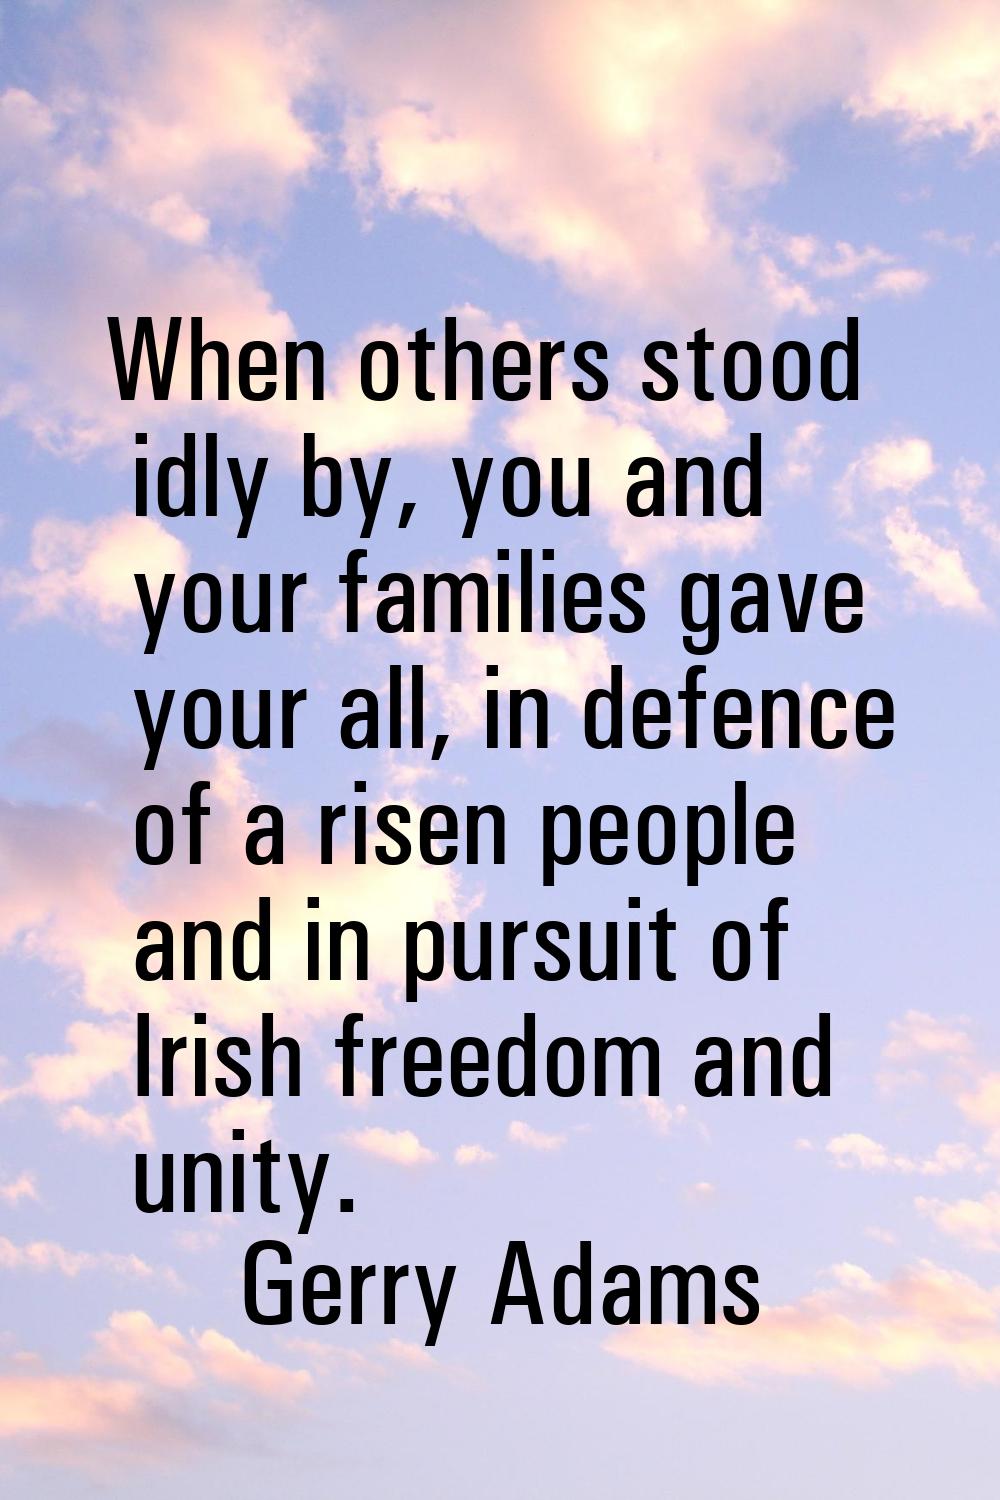 When others stood idly by, you and your families gave your all, in defence of a risen people and in